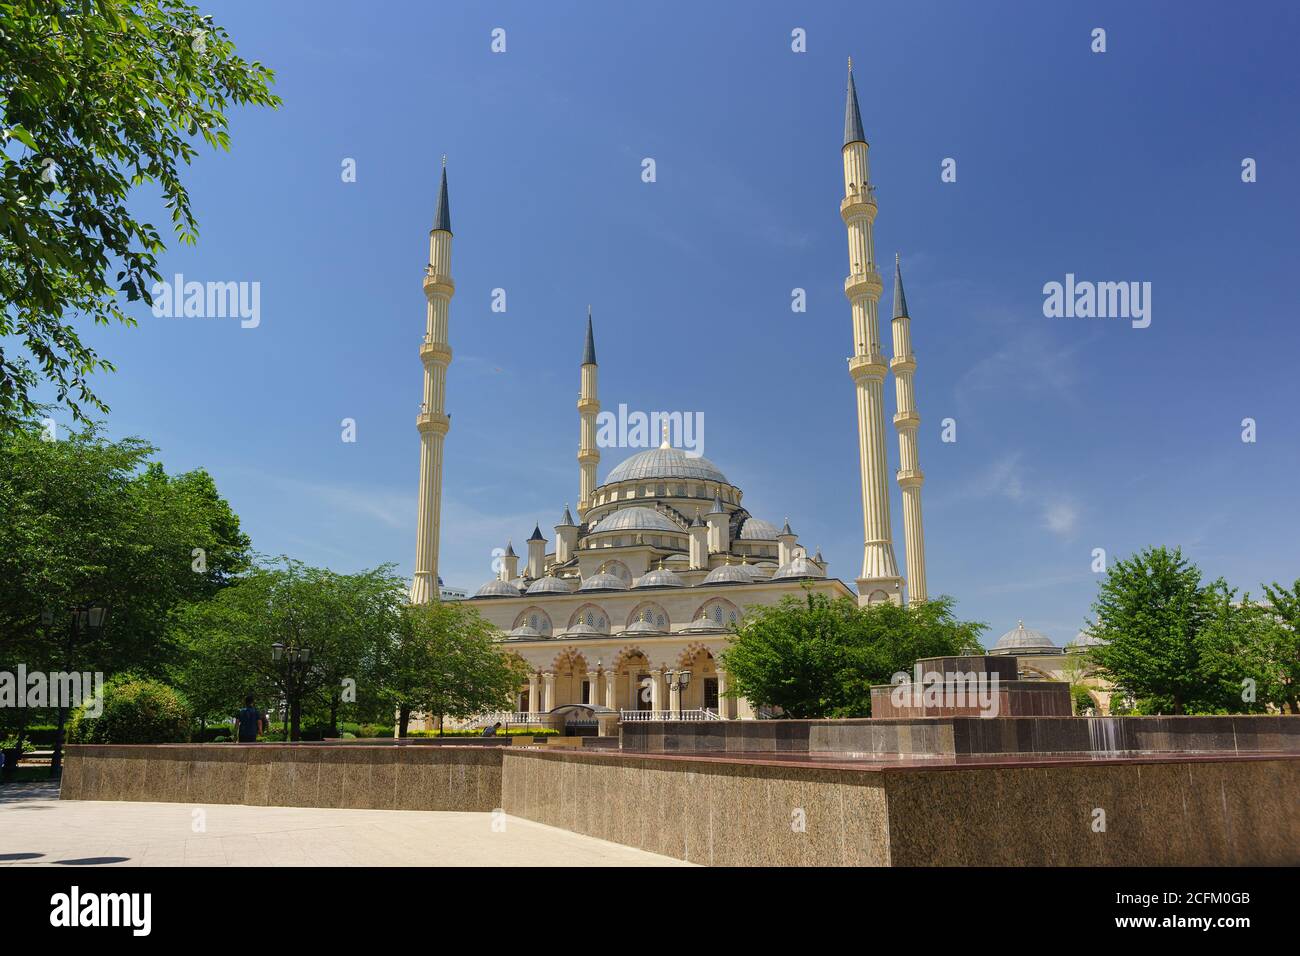 Grozny, Chechen Republic, Russia - June 02, 2019: Domes and minarets Of the Akhmat Kadyrov heart of Chechnya mosque on a Sunny summer day Stock Photo